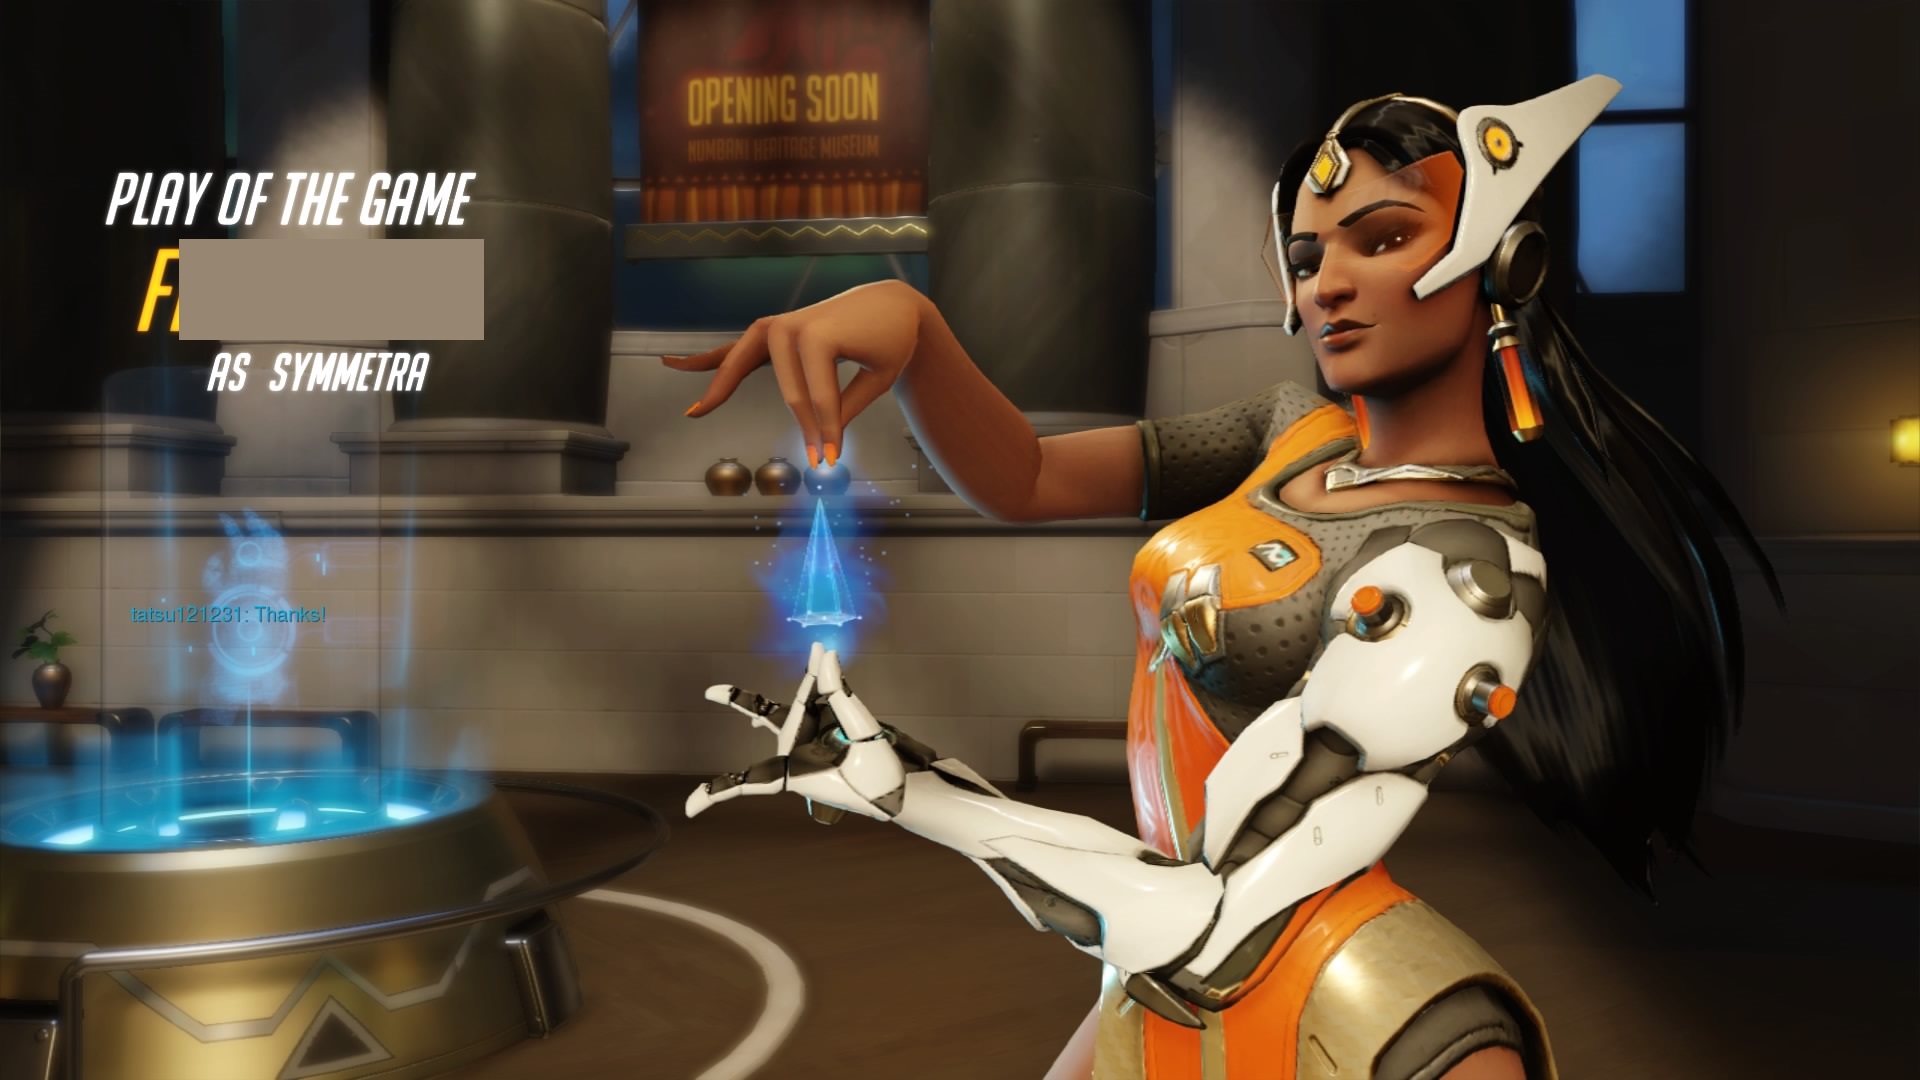 Symmetra Play of the Game